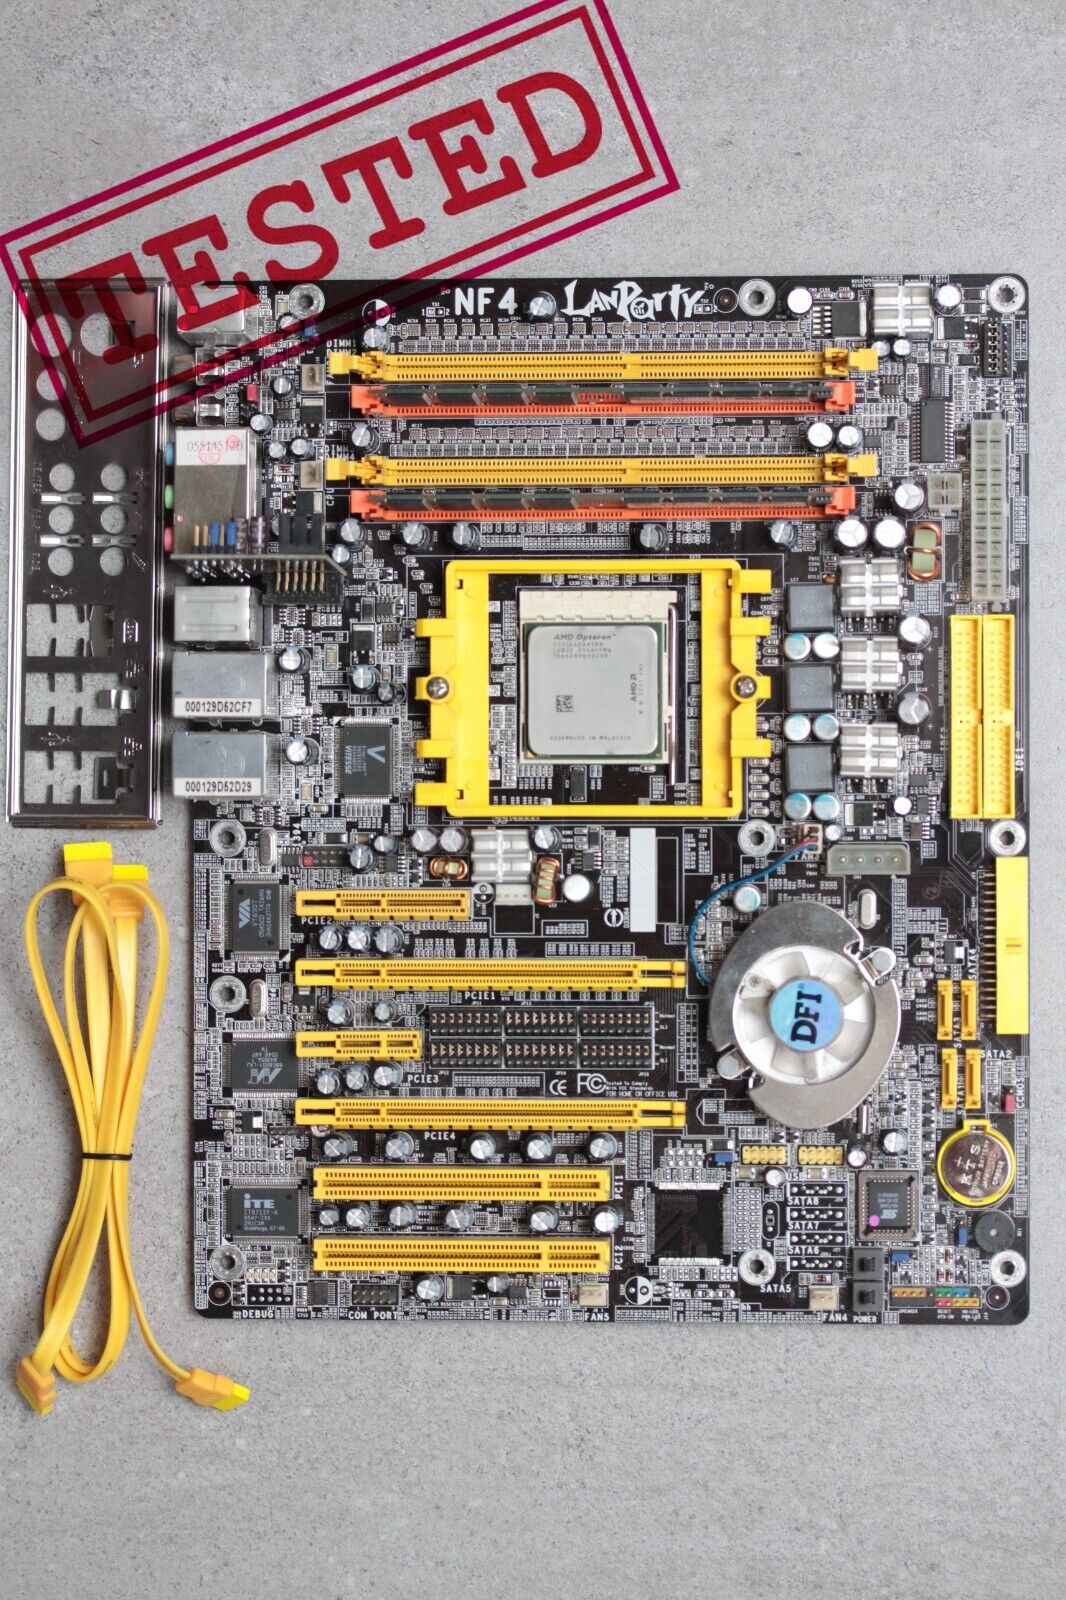 DFI LanParty UT NF4 ULTRA-D, soc. 939 Motherboard with CPU Opteron 144 & 1GB RAM